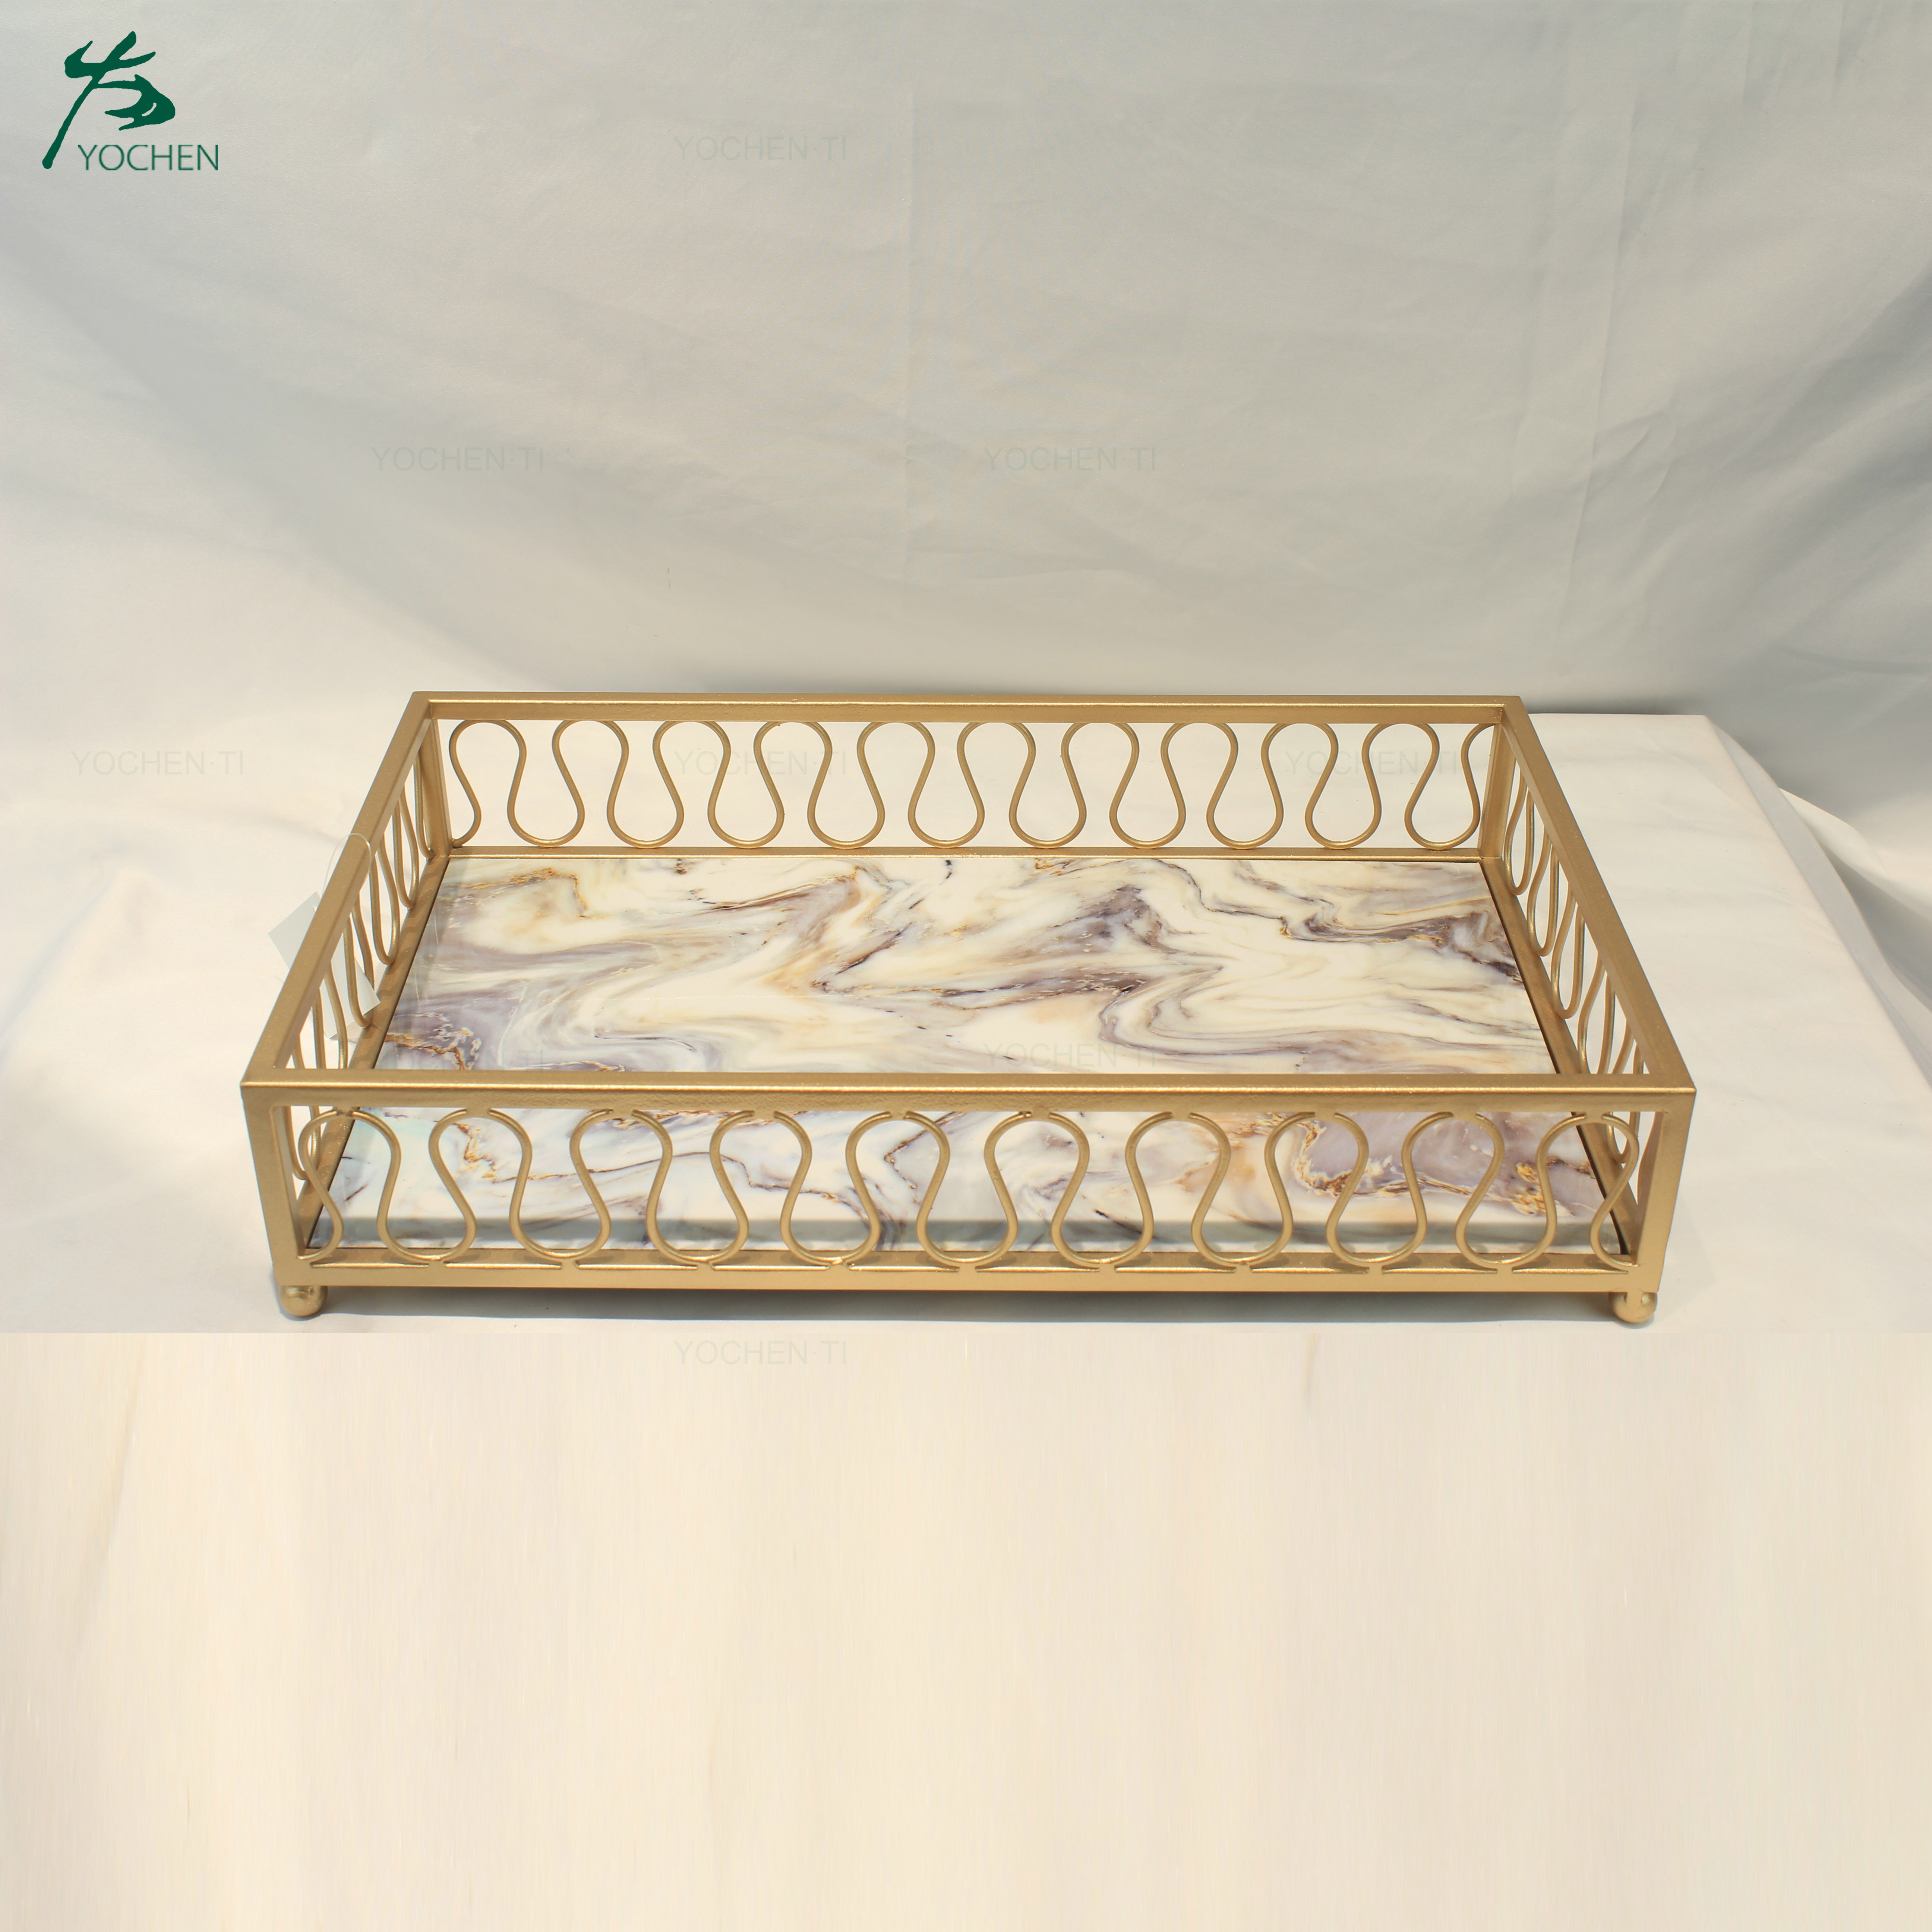 Customized Hotsale Luxury Rectangle Marble Tray Fruit Plate Metal Service Tray Gold Plated